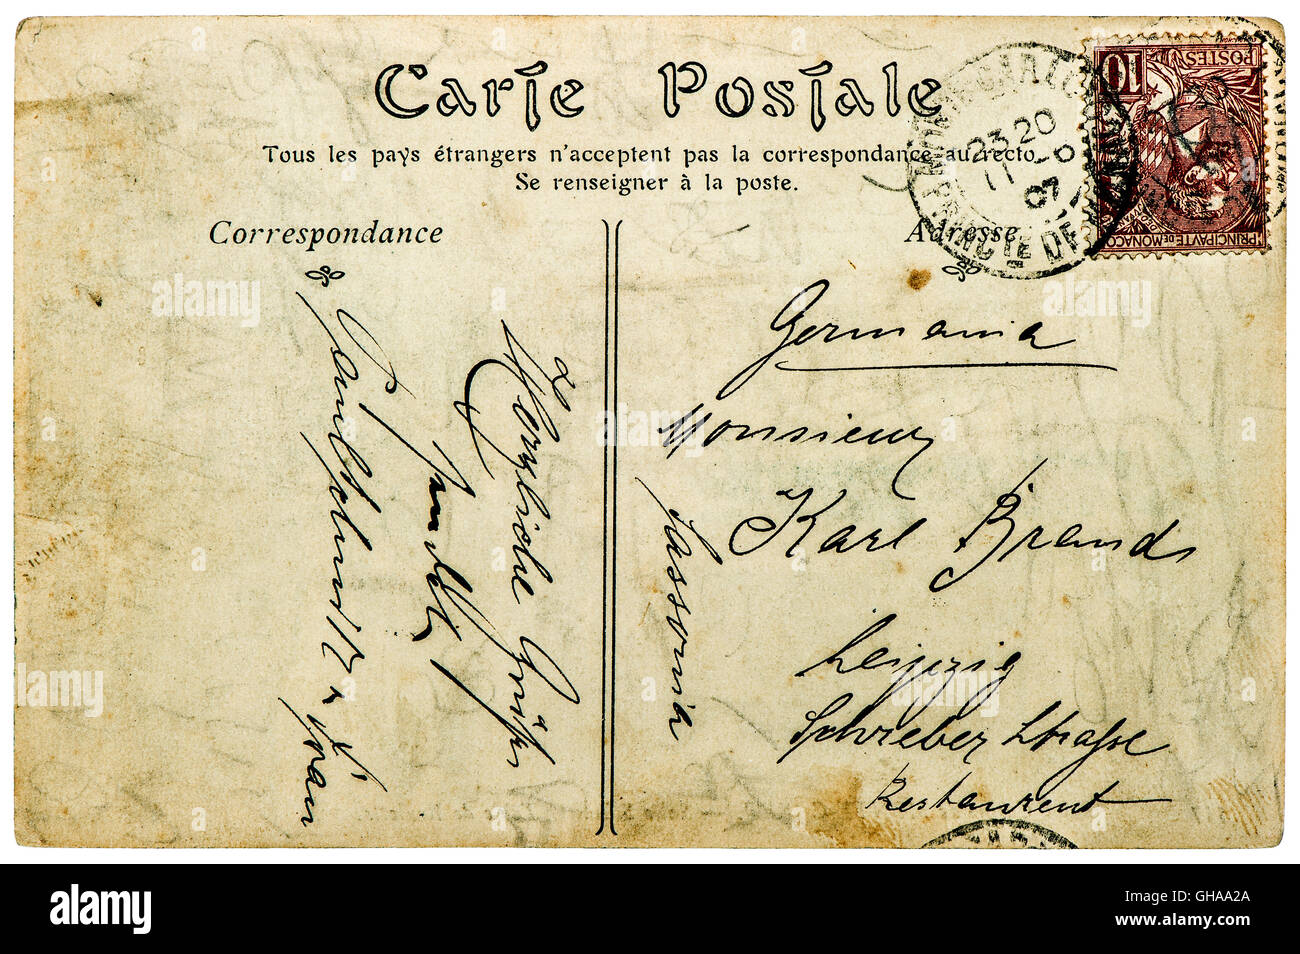 Vintage handwritten postcard letter with unreadable undefined text. Used paper texture background Stock Photo